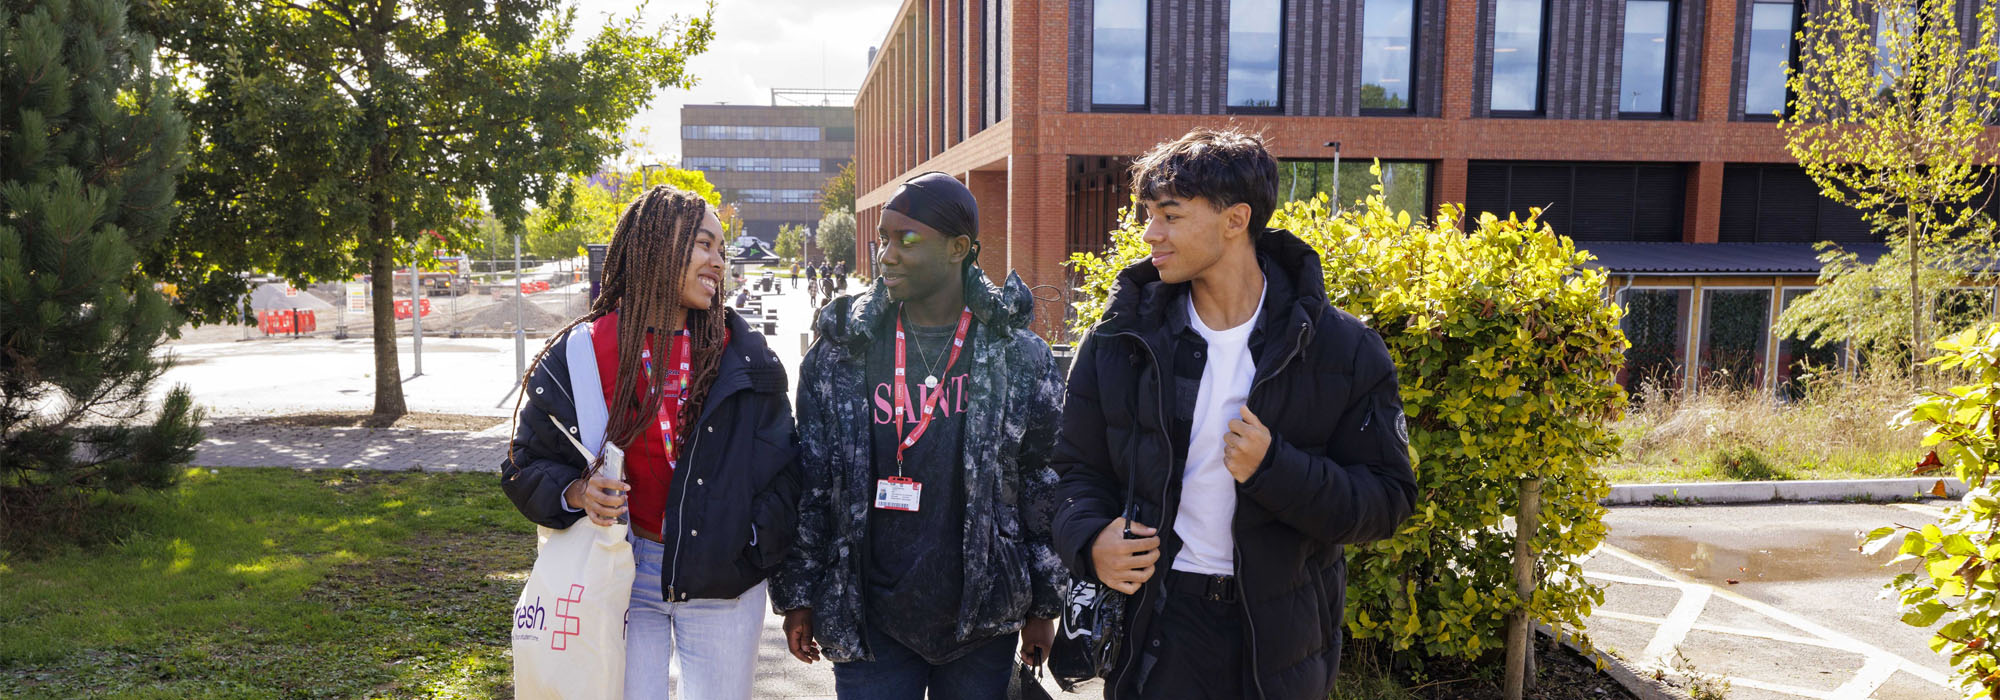 A group of three students are dressed casually and are talking and walking on the Stoke-on-Trent campus with the Catalyst building behind them